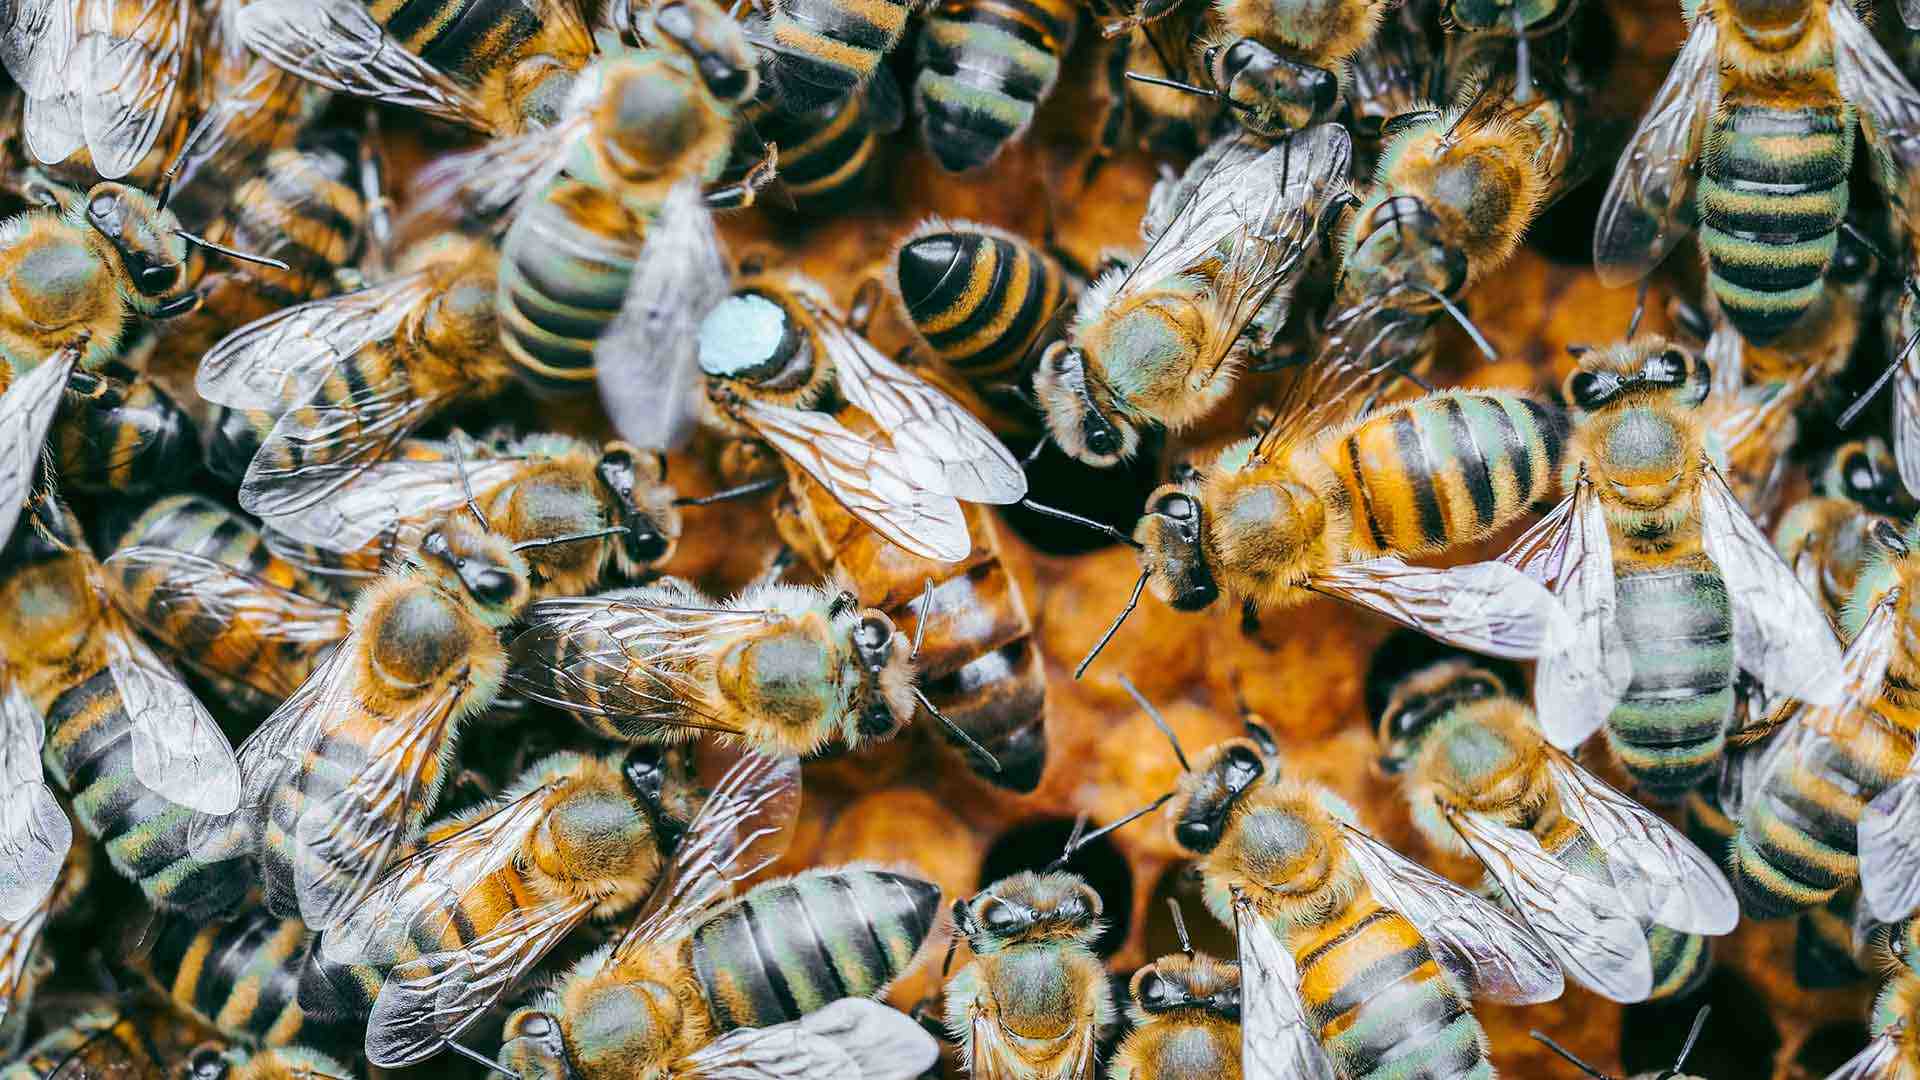 A new UMD-led survey found that commercial beekeepers lost an average number of colonies in the past year, compared to a previous year that saw a record rate of bee colony loss. Small "backyard" beekeepers experienced another tough year, however. Photo credit: Ante Hamersmit/Unsplash.